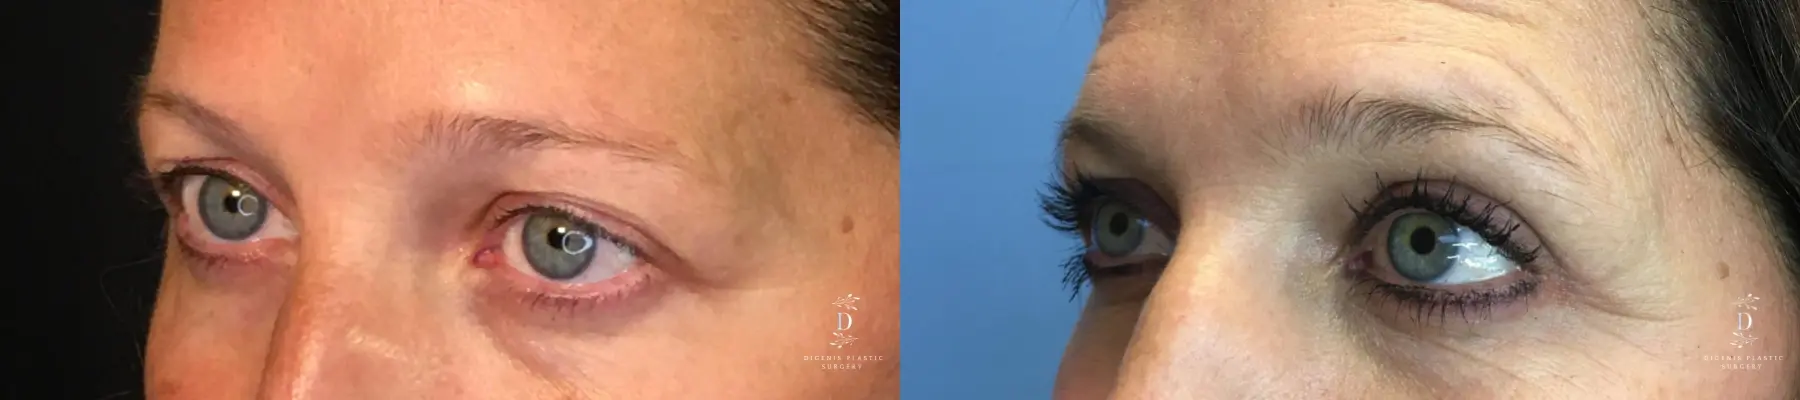 Eyelid Surgery: Patient 17 - Before and After 4